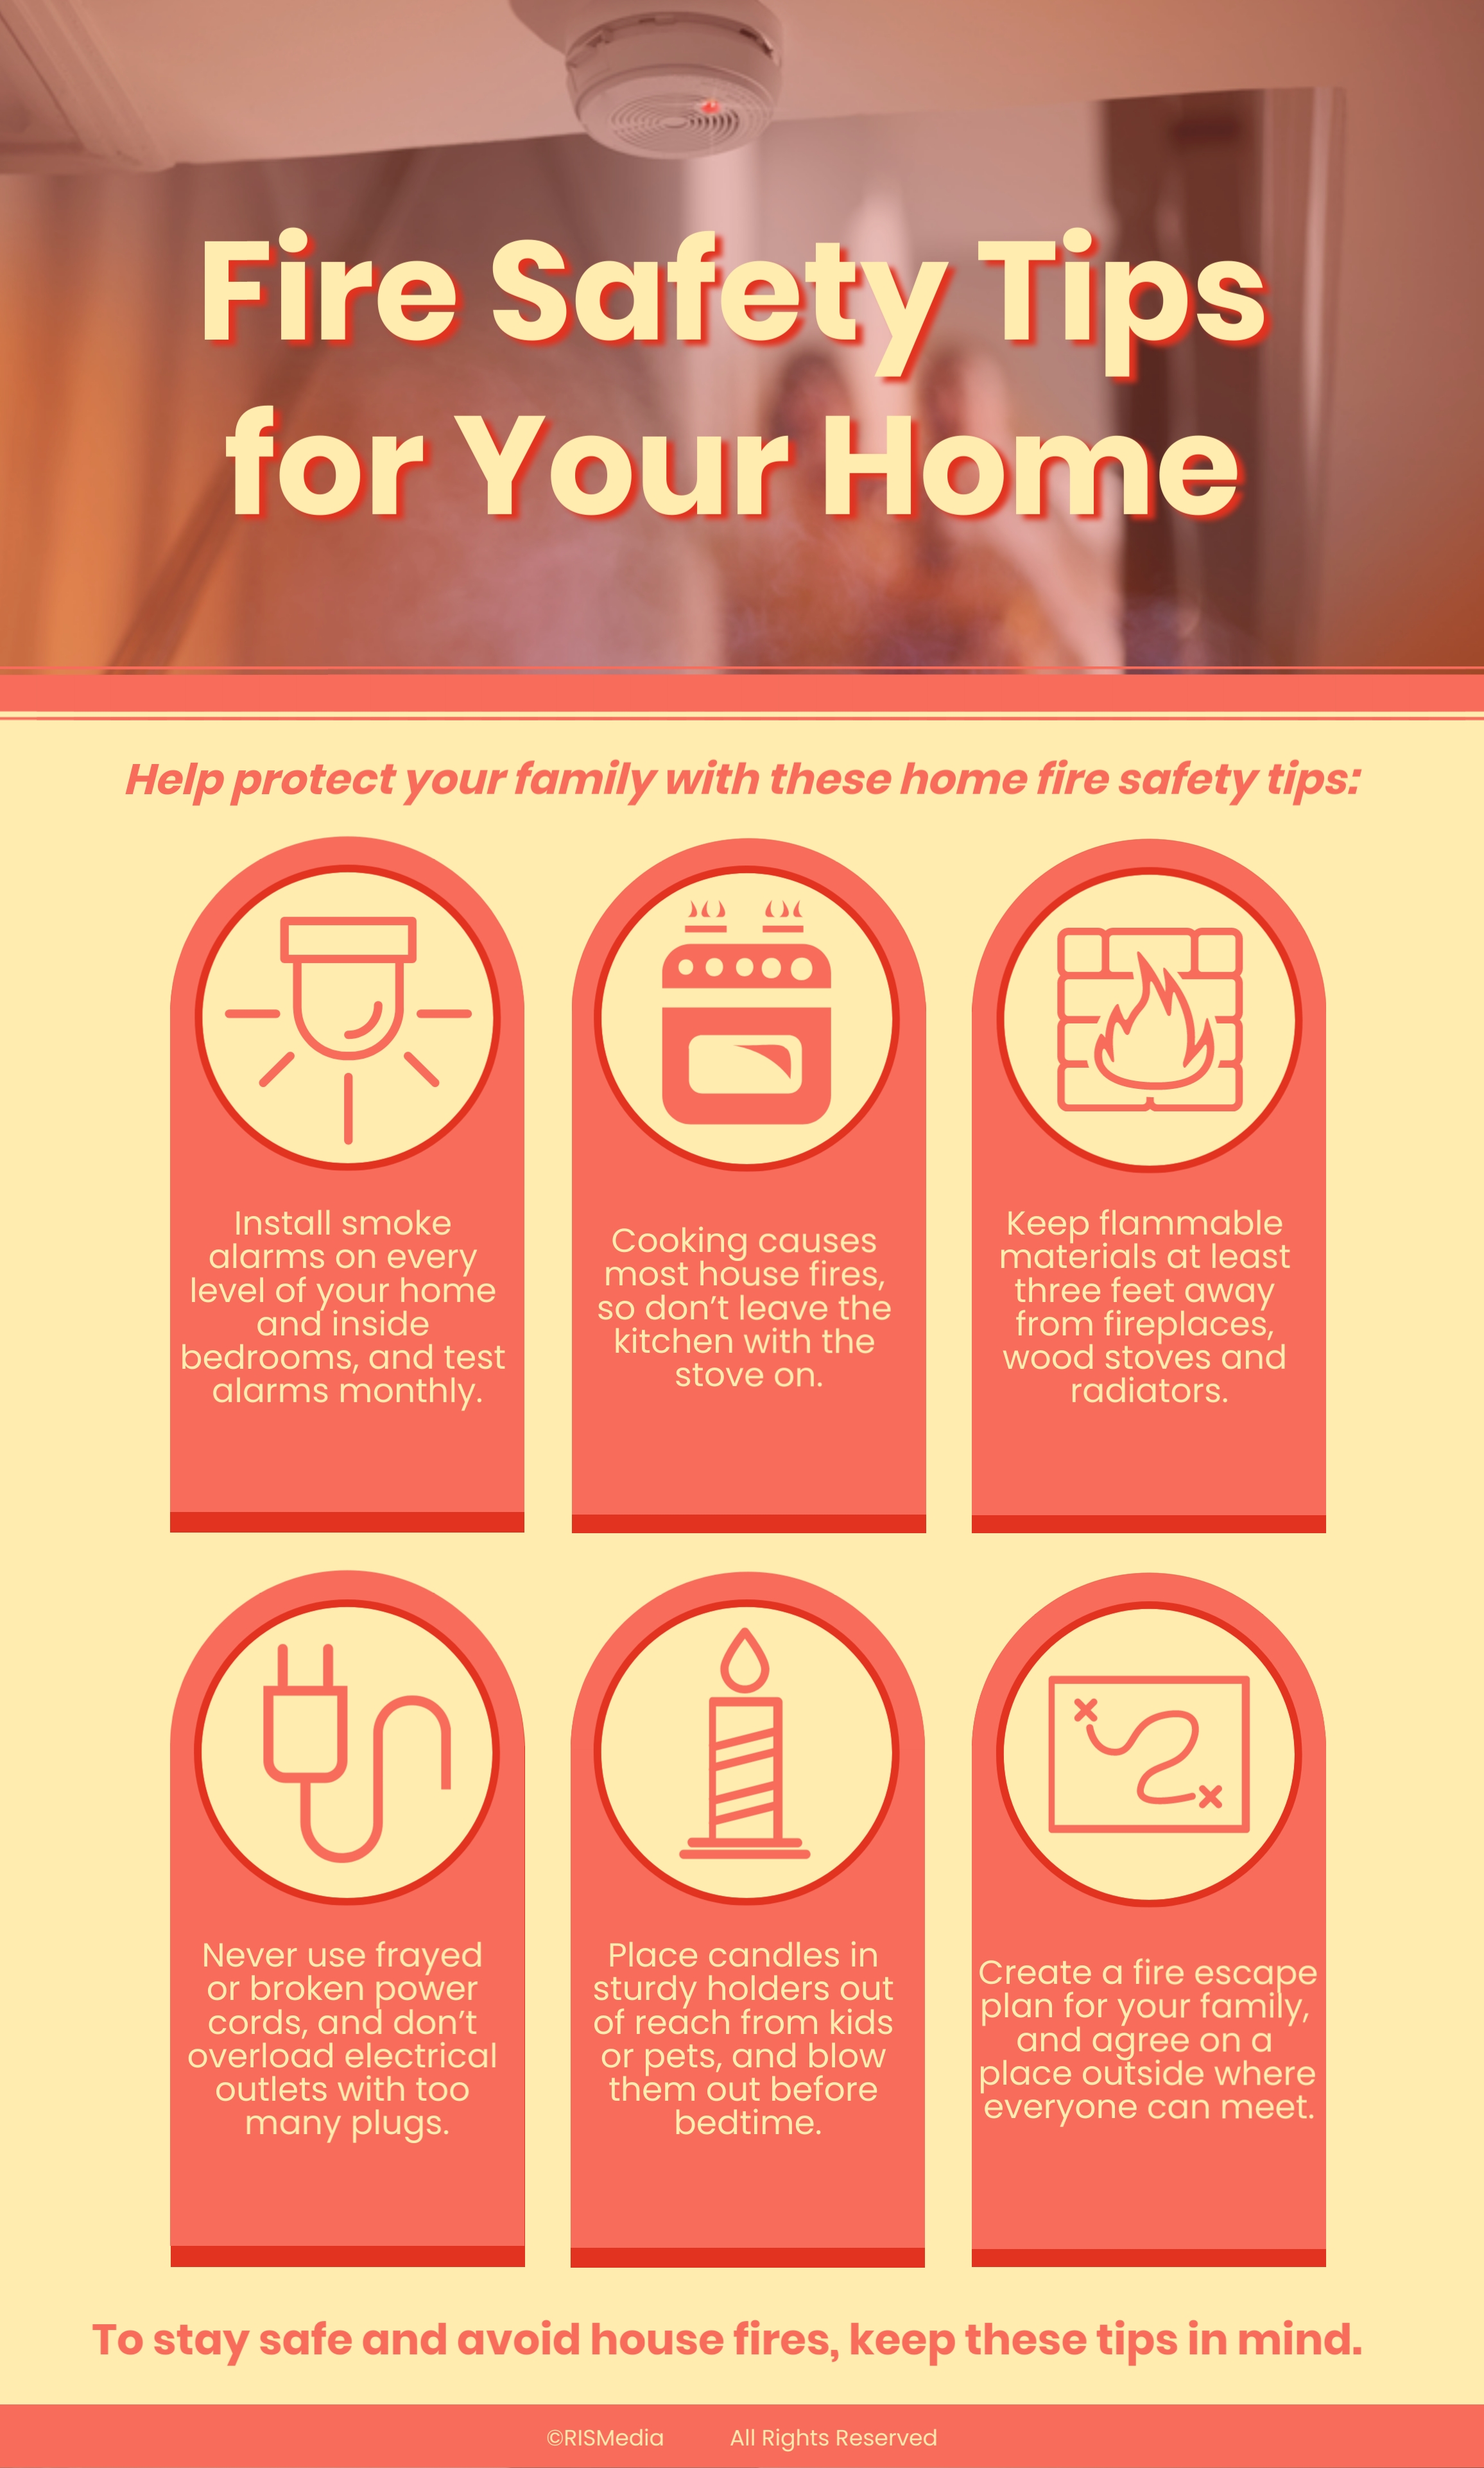 Fire Safety Tips For Your Home — Rismedia